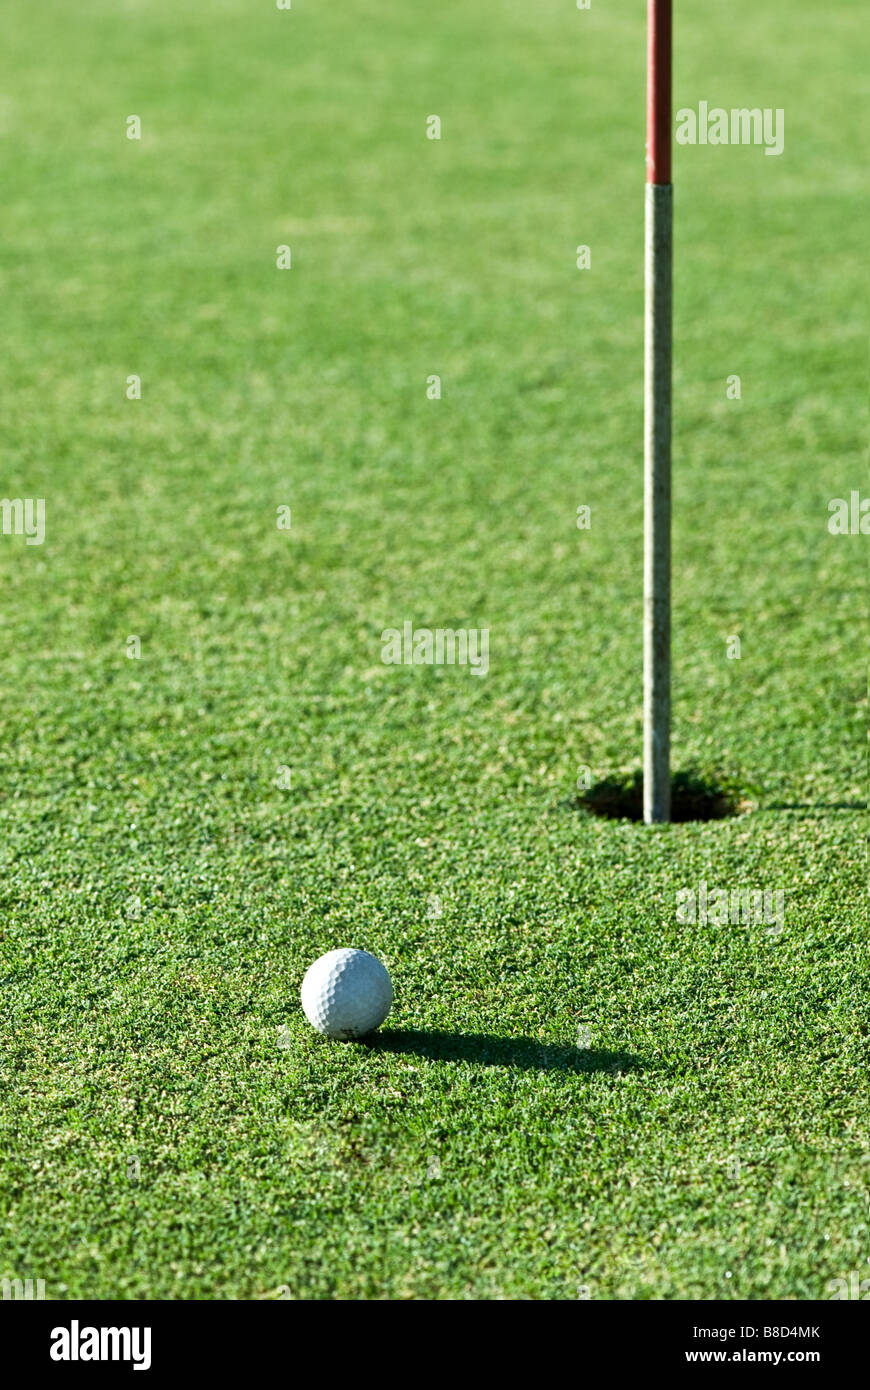 A golf ball a short putt away from the hole with the flag still in it Stock Photo